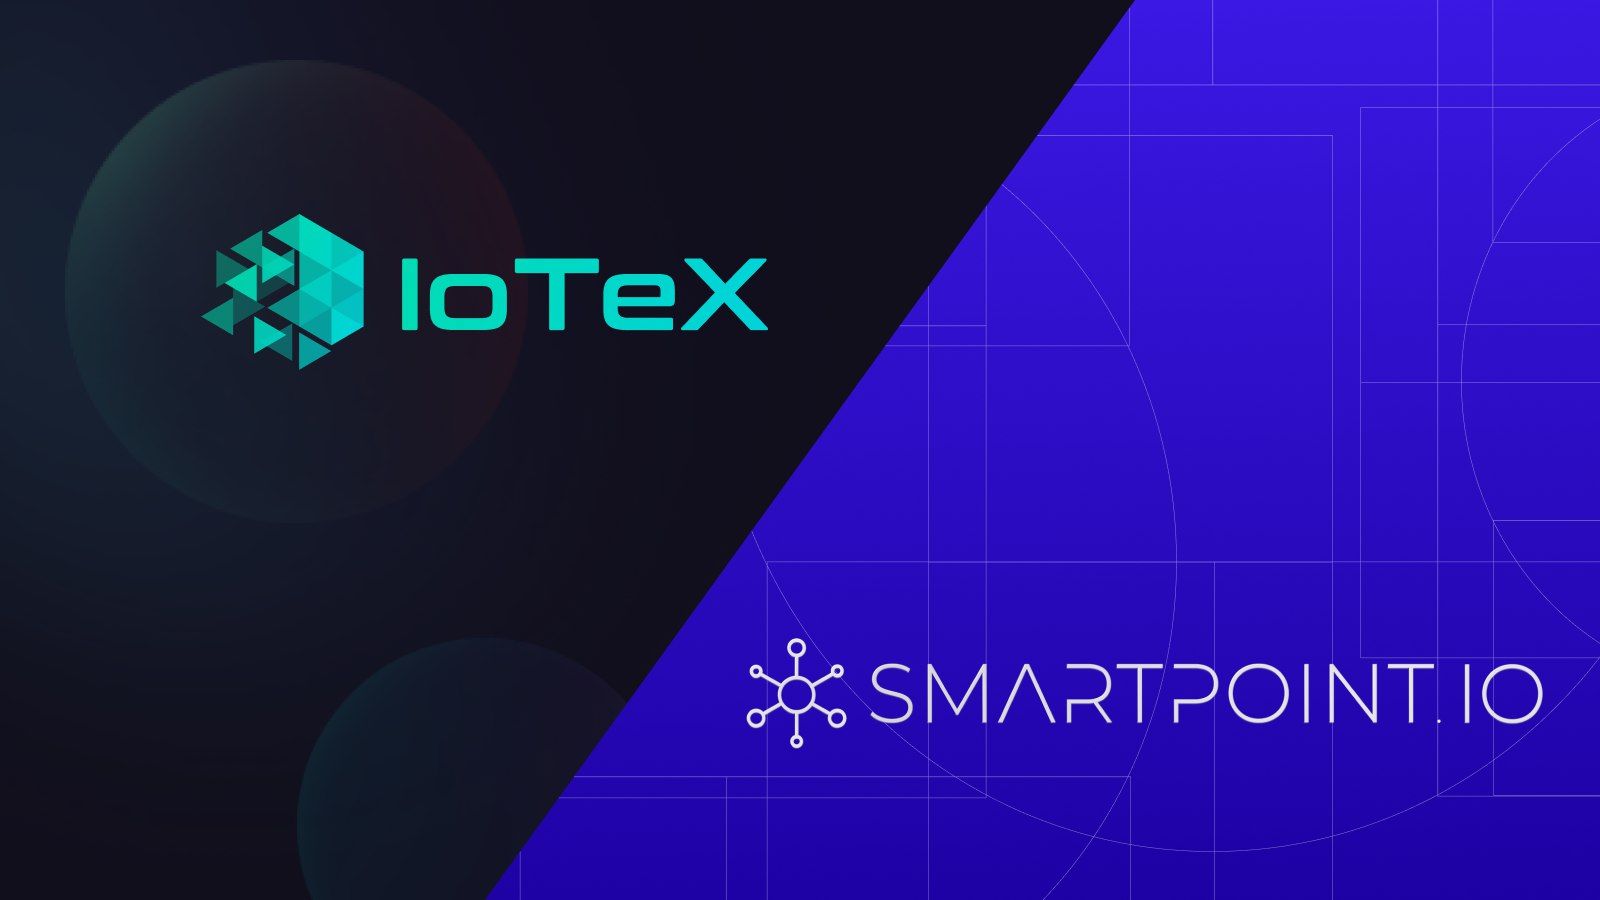 SmartPoint.io and IoTeX Join Forces to Bring Attention to Web3